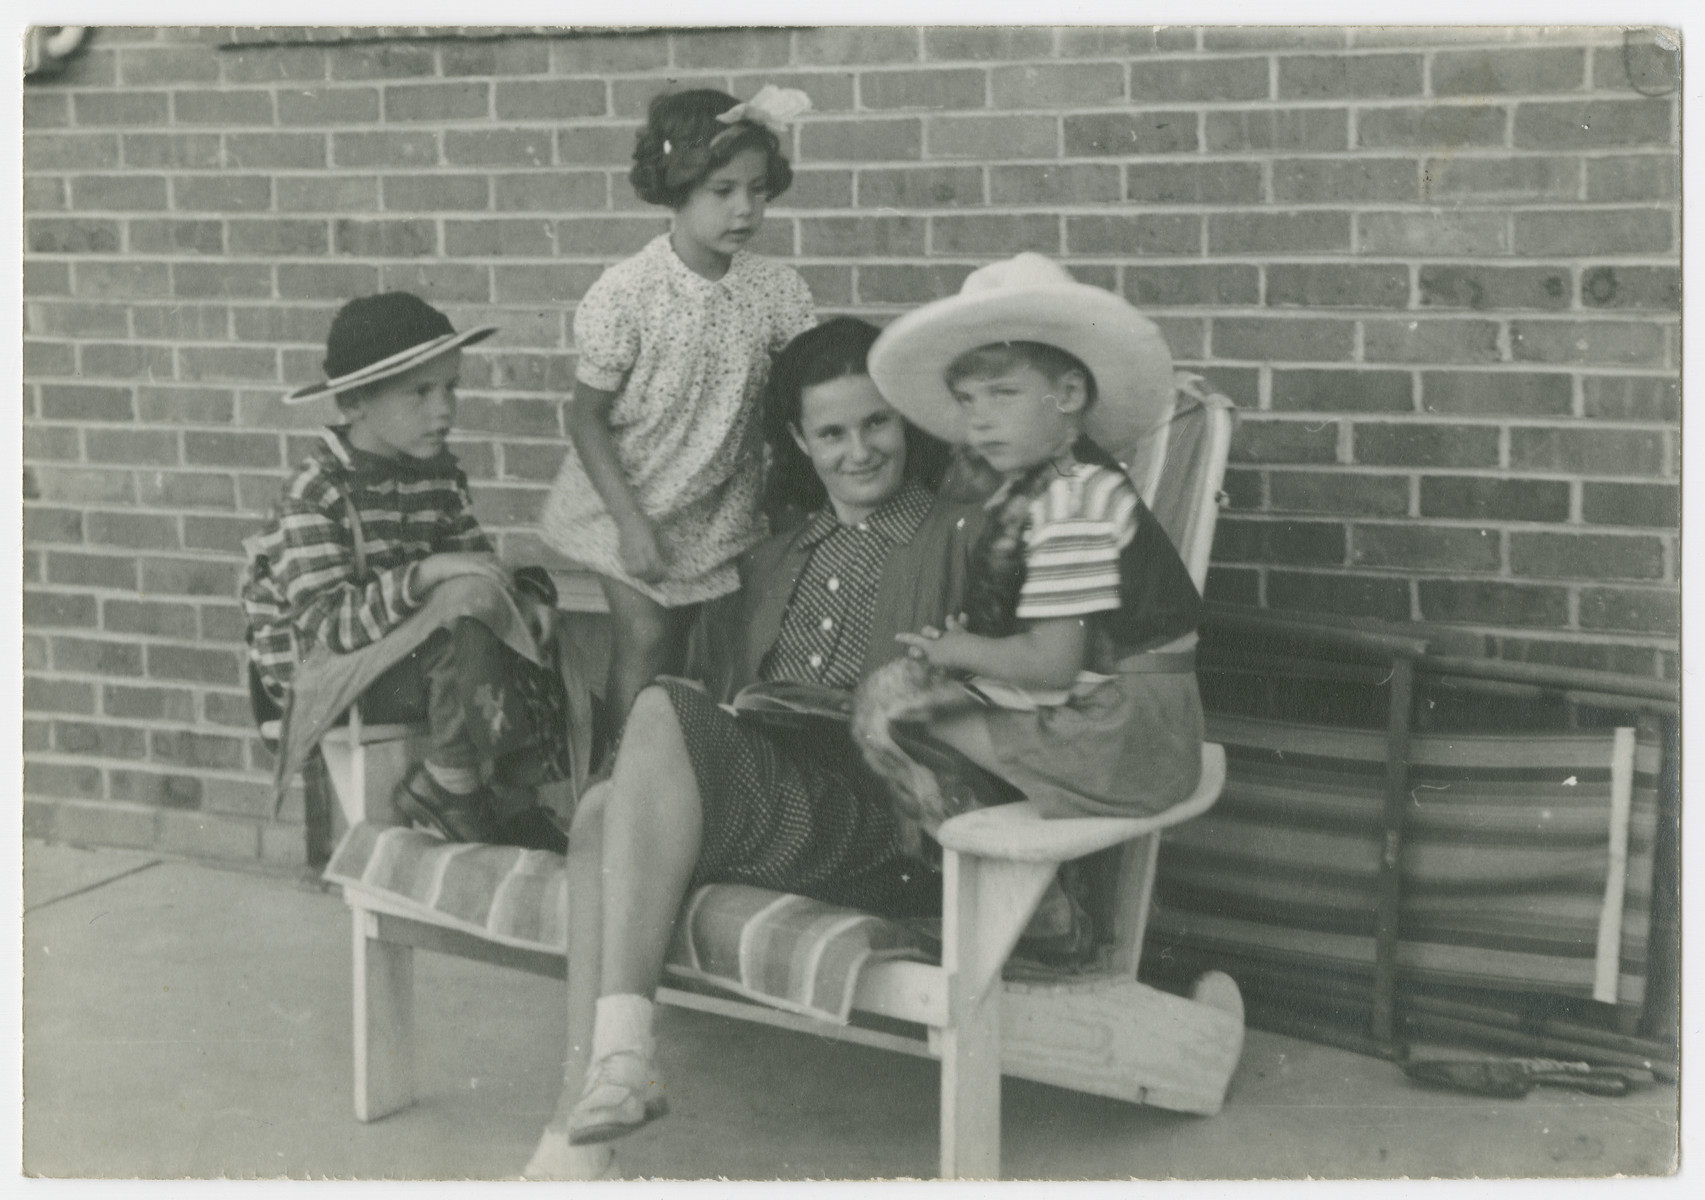 Mara Vishniac sits on a bench surrounded by three younger children.

Ruth Rahn is to her left.  The Rahns and Vishniacs had been friends in Berlin and both immigrated to the United States to escape the Nazis.

The original caption reads: "Mara and her kindergarten.  Ruth dressing "girlishness" (see bow in hair) probably to impress the fierce cowboys."